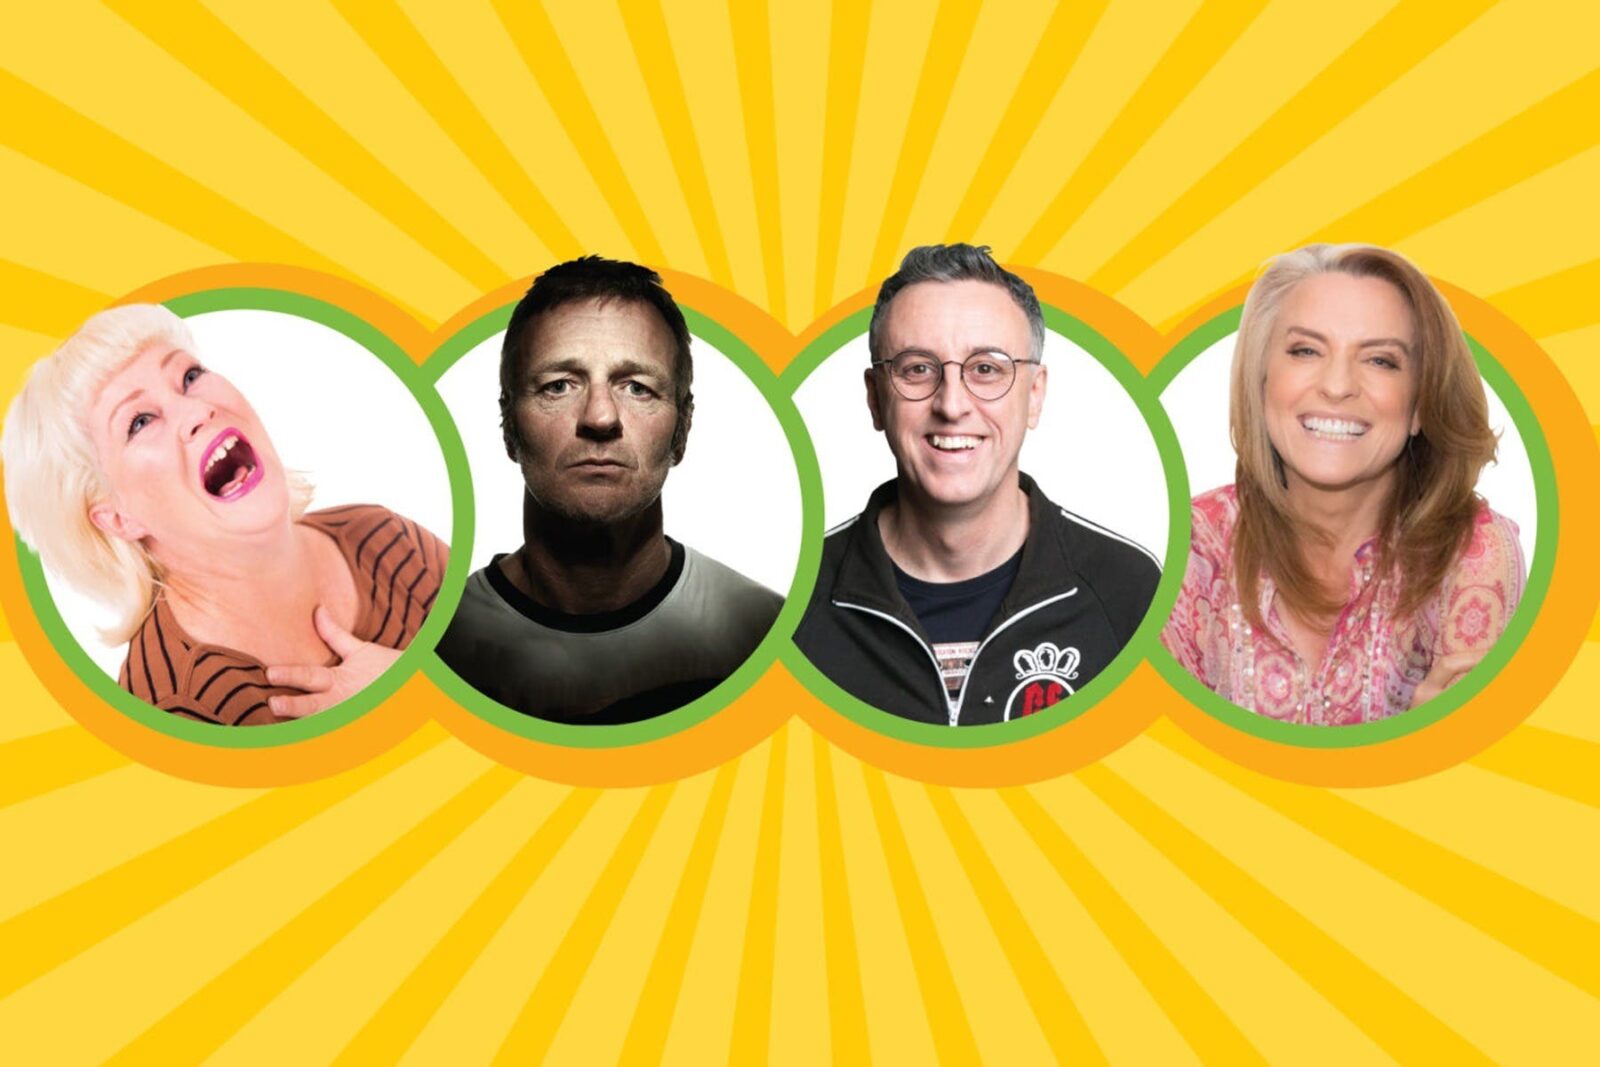 Four circles on a yellow background with pictures of four people shoulder up, smiling